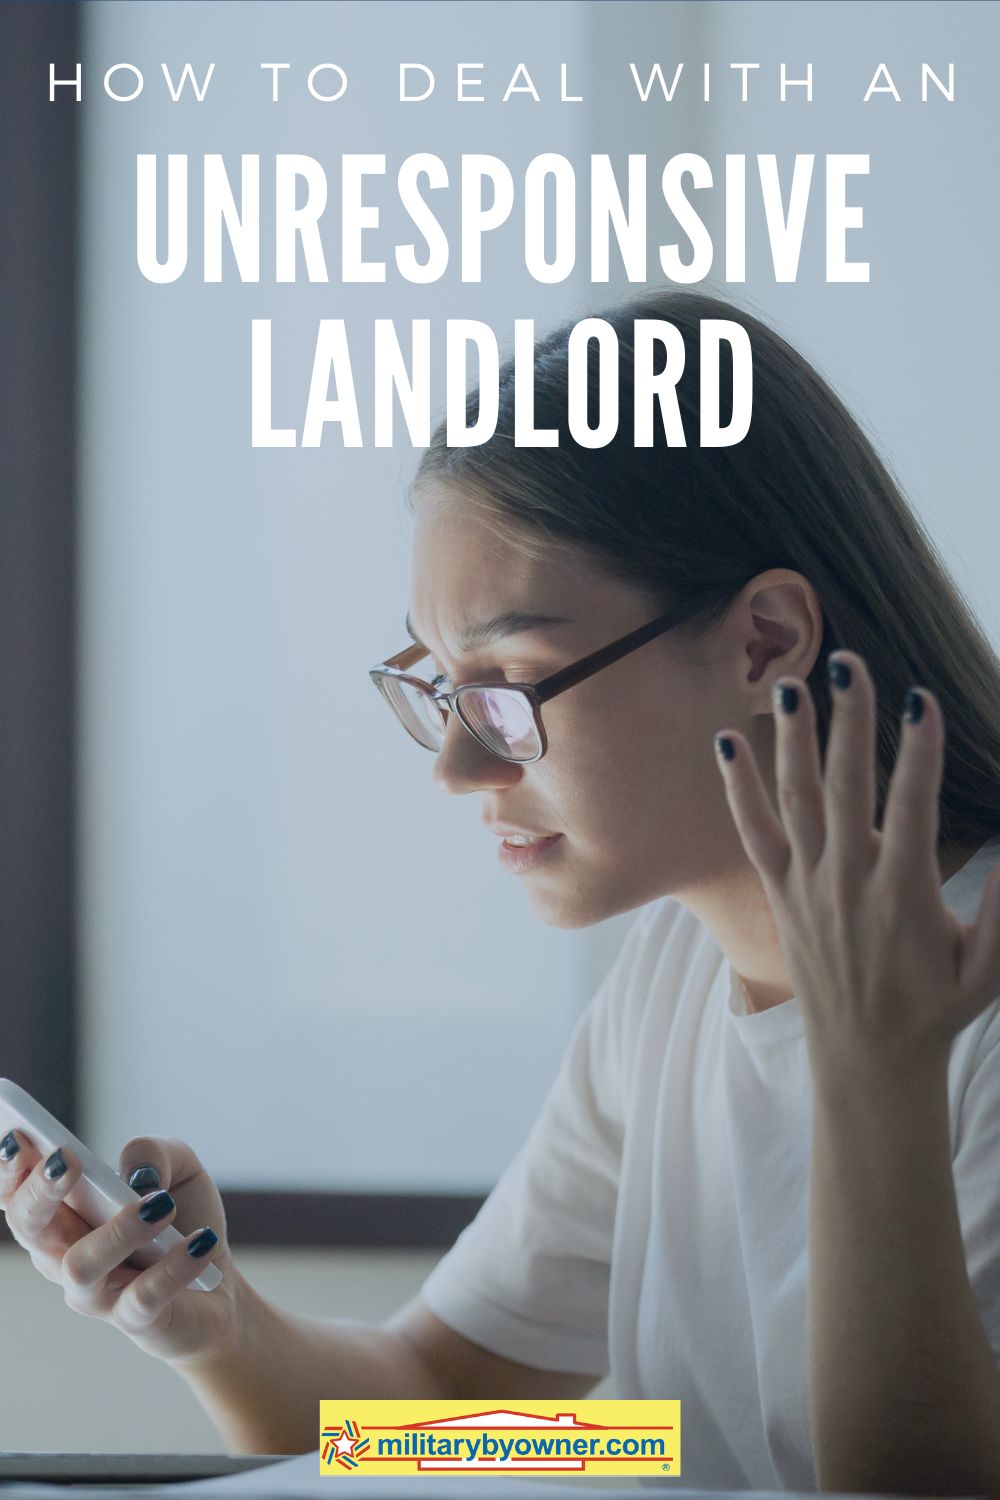 How_to_Deal_with_an_Unresponsive_Landlord